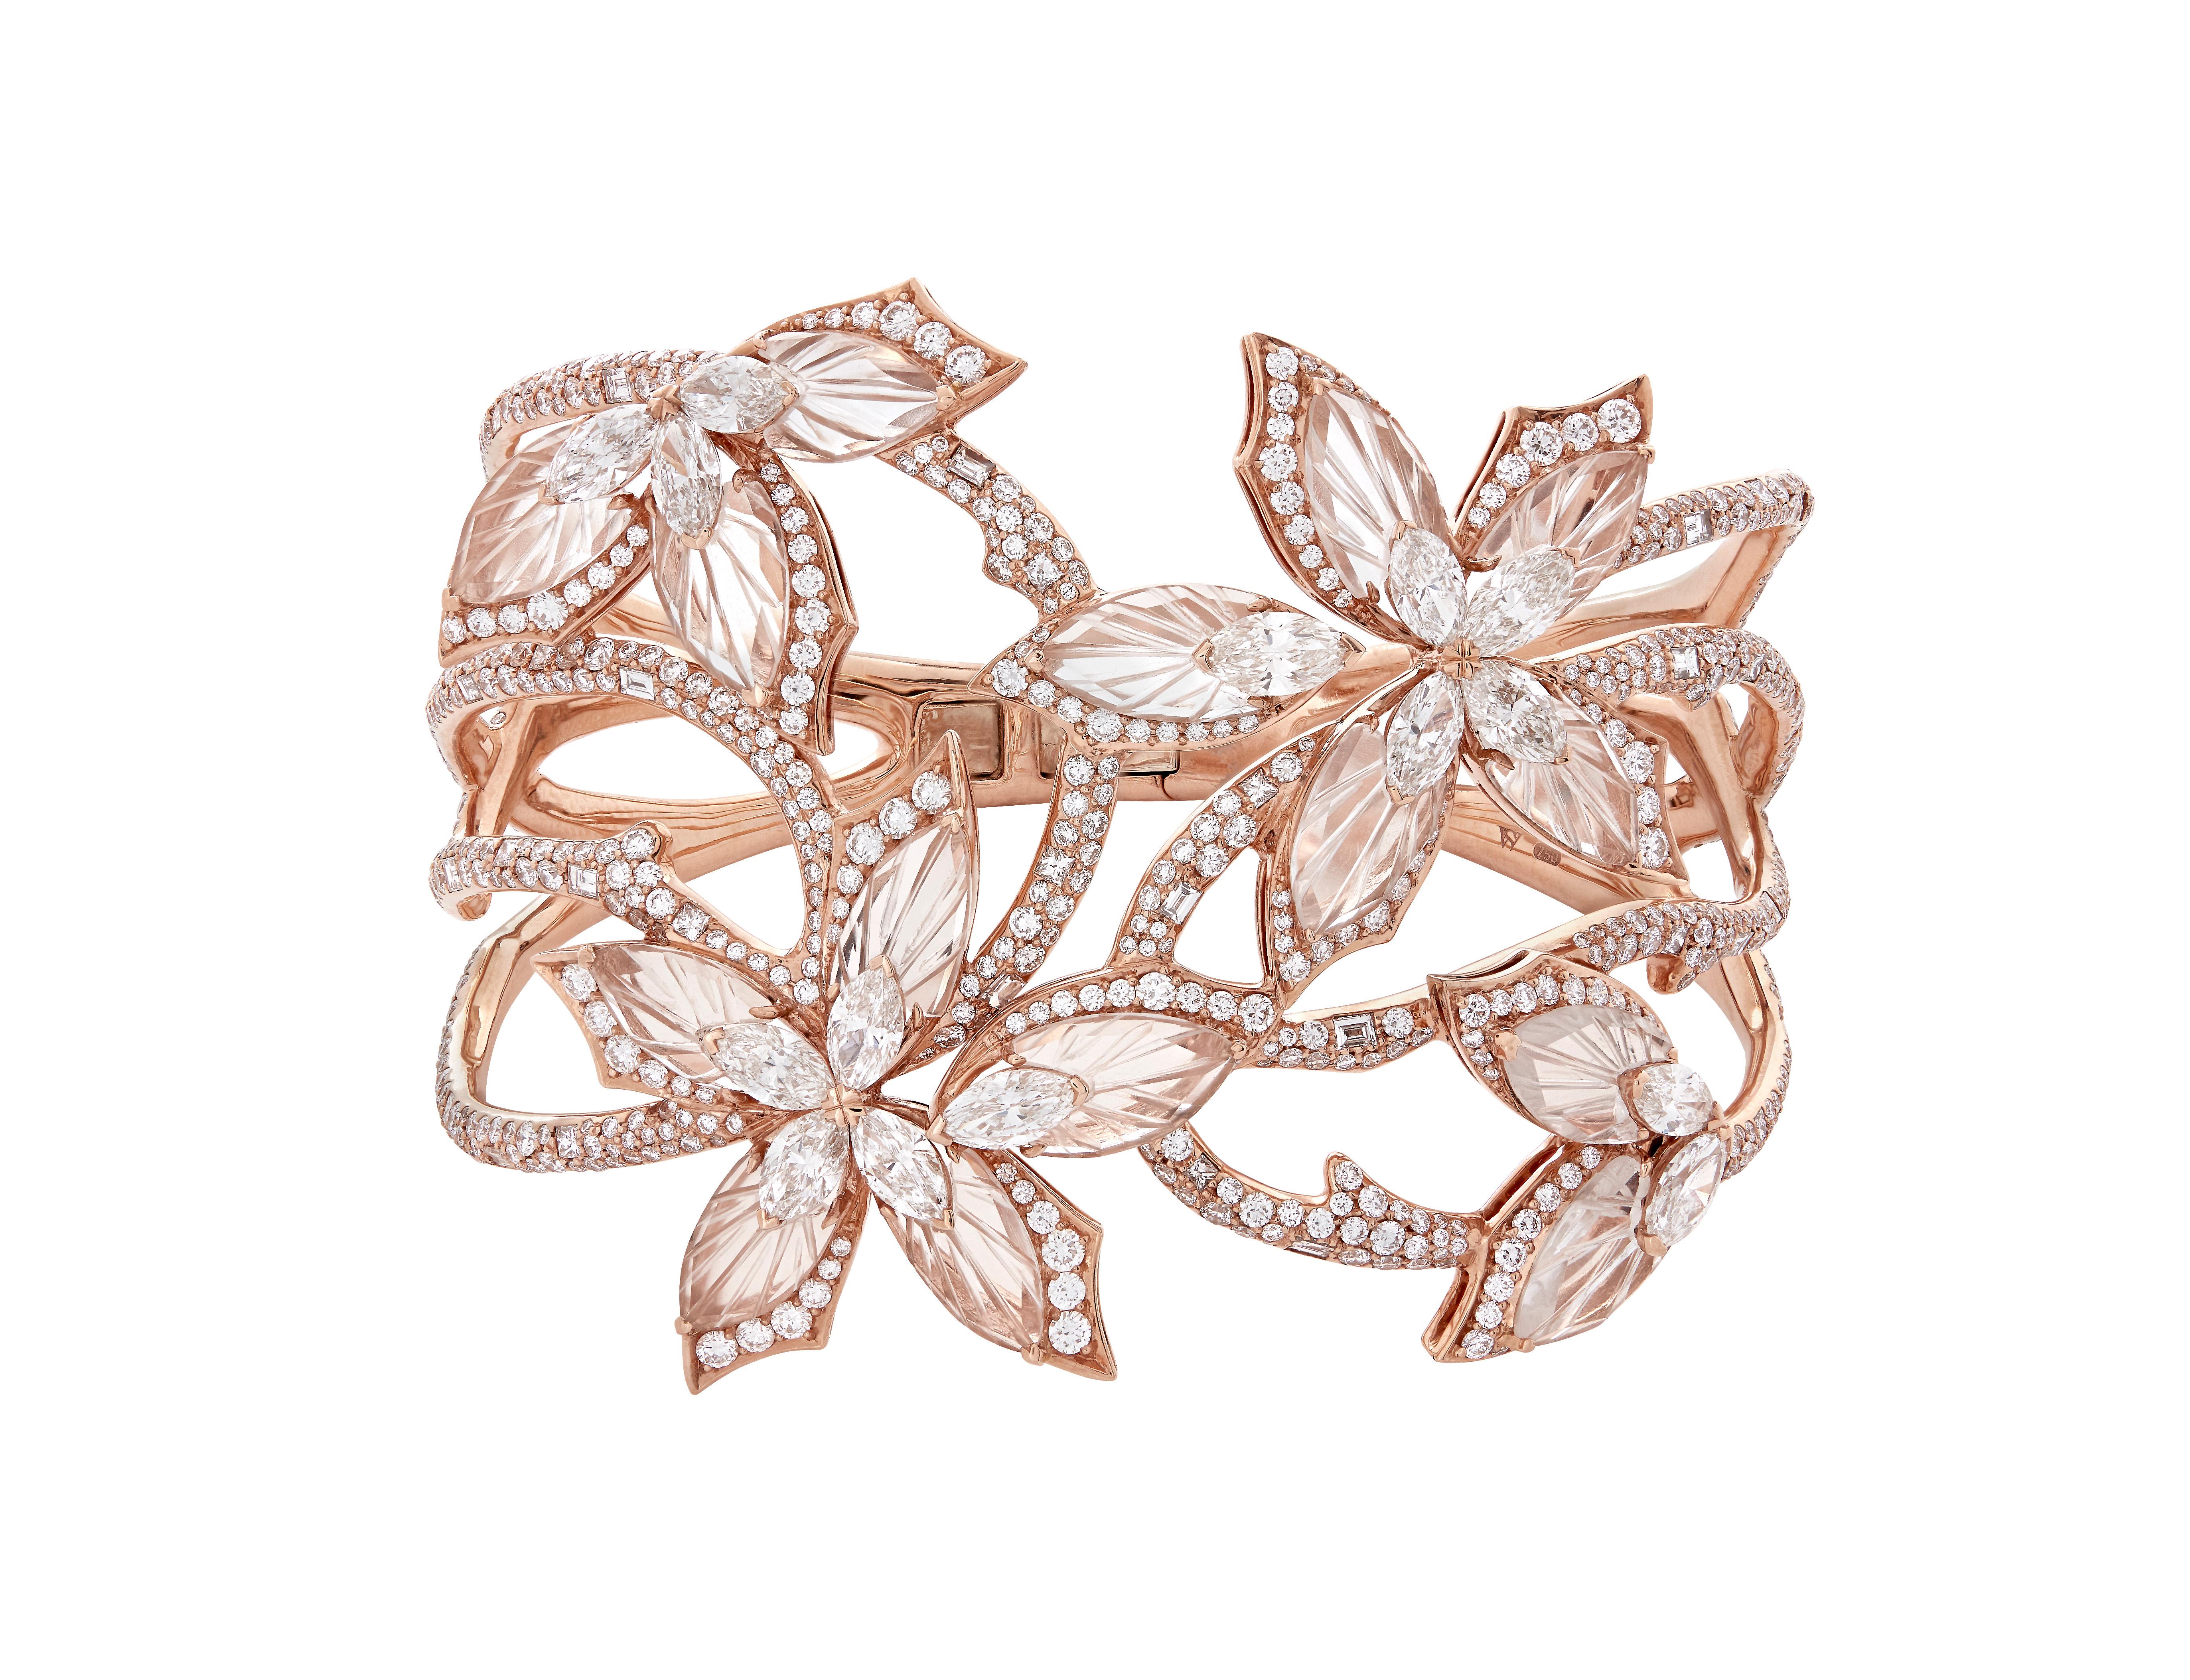 Love Me, Love Me Not Couture Bangle in 18ct rose Gold set with marquise-cut white Diamonds (5.45ct), white Diamond pavé (8.02ct), baguette-cut white Diamonds (1.06ct), and a facetted Rock Crystal surround (11ct).

Inner Dimensions - 57mm x